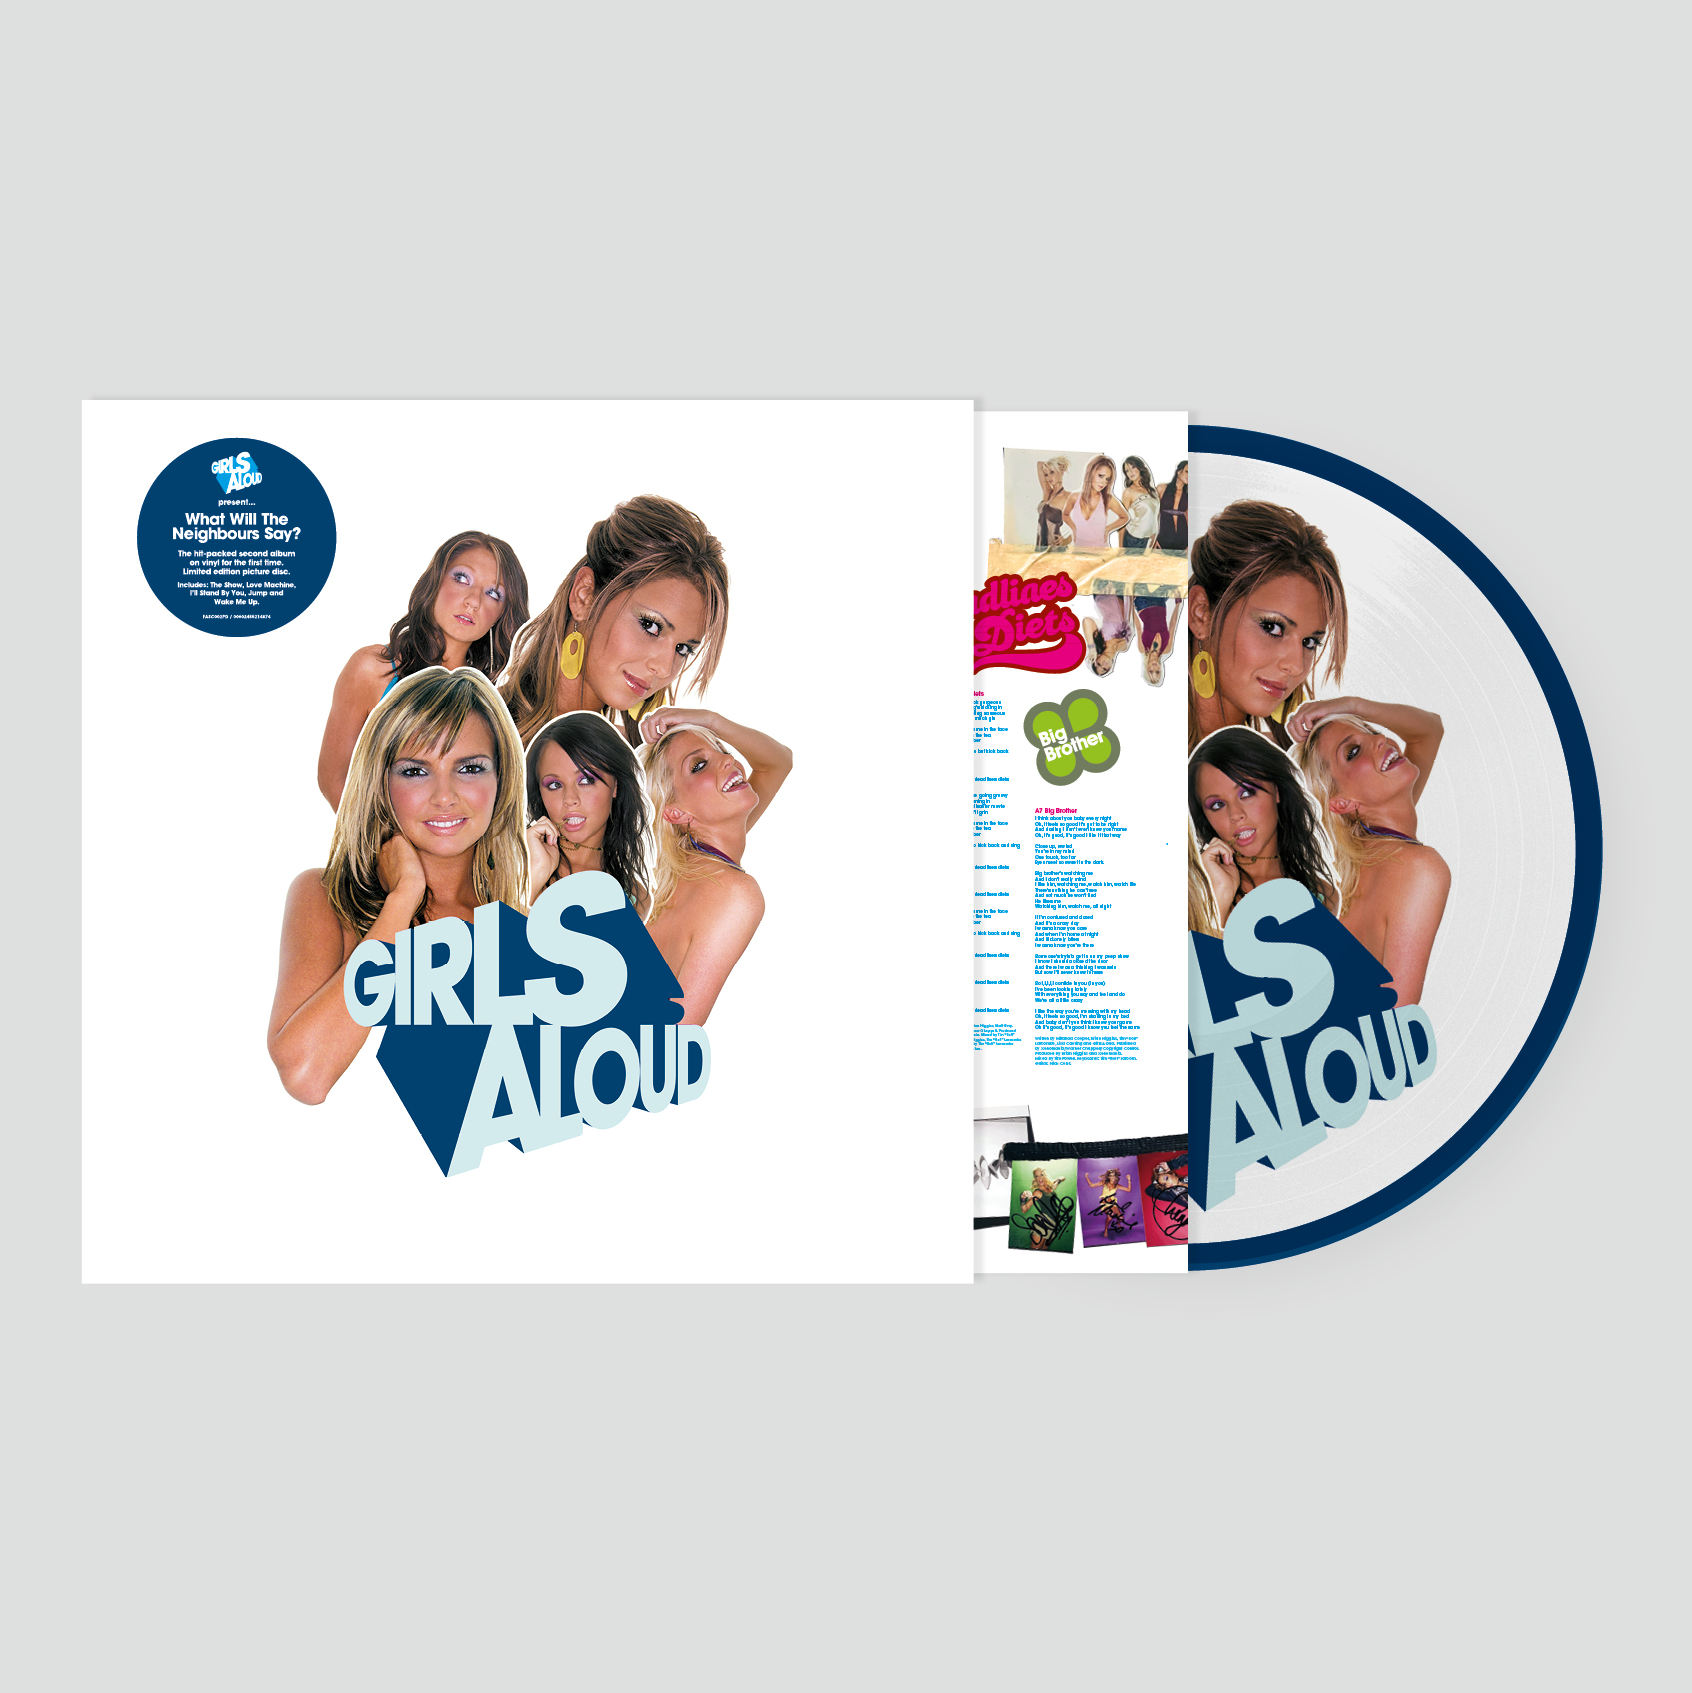 What Will The Neighbours Say?: Limited Picture Disc Vinyl & Logos Mug